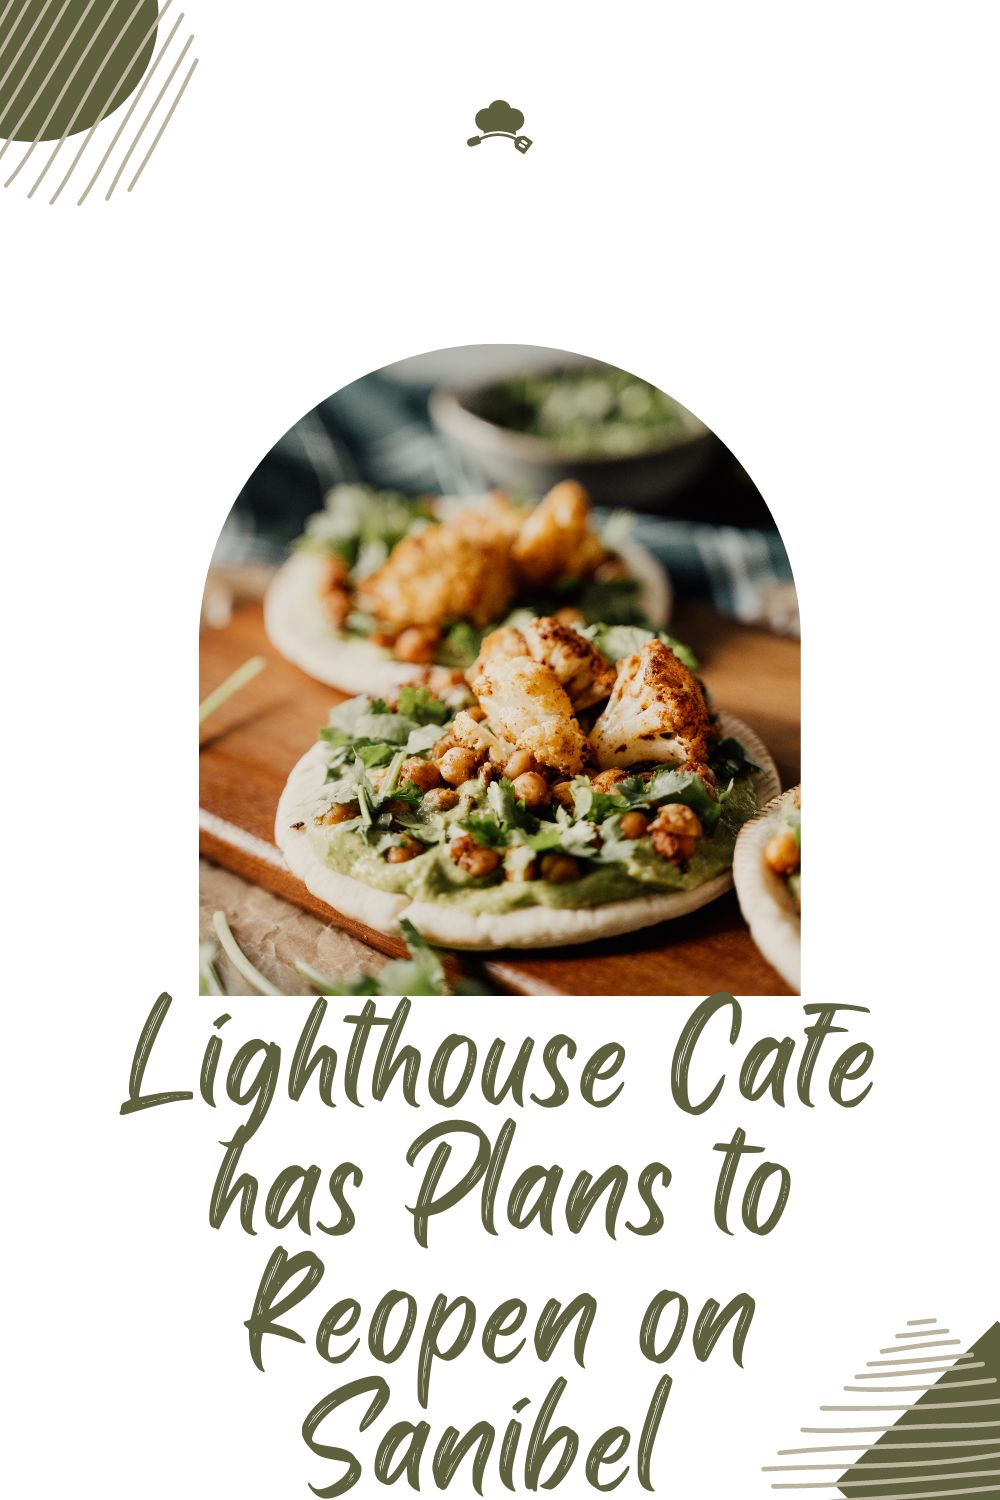 Lighthouse Cafe has Plans to Reopen on Sanibel 